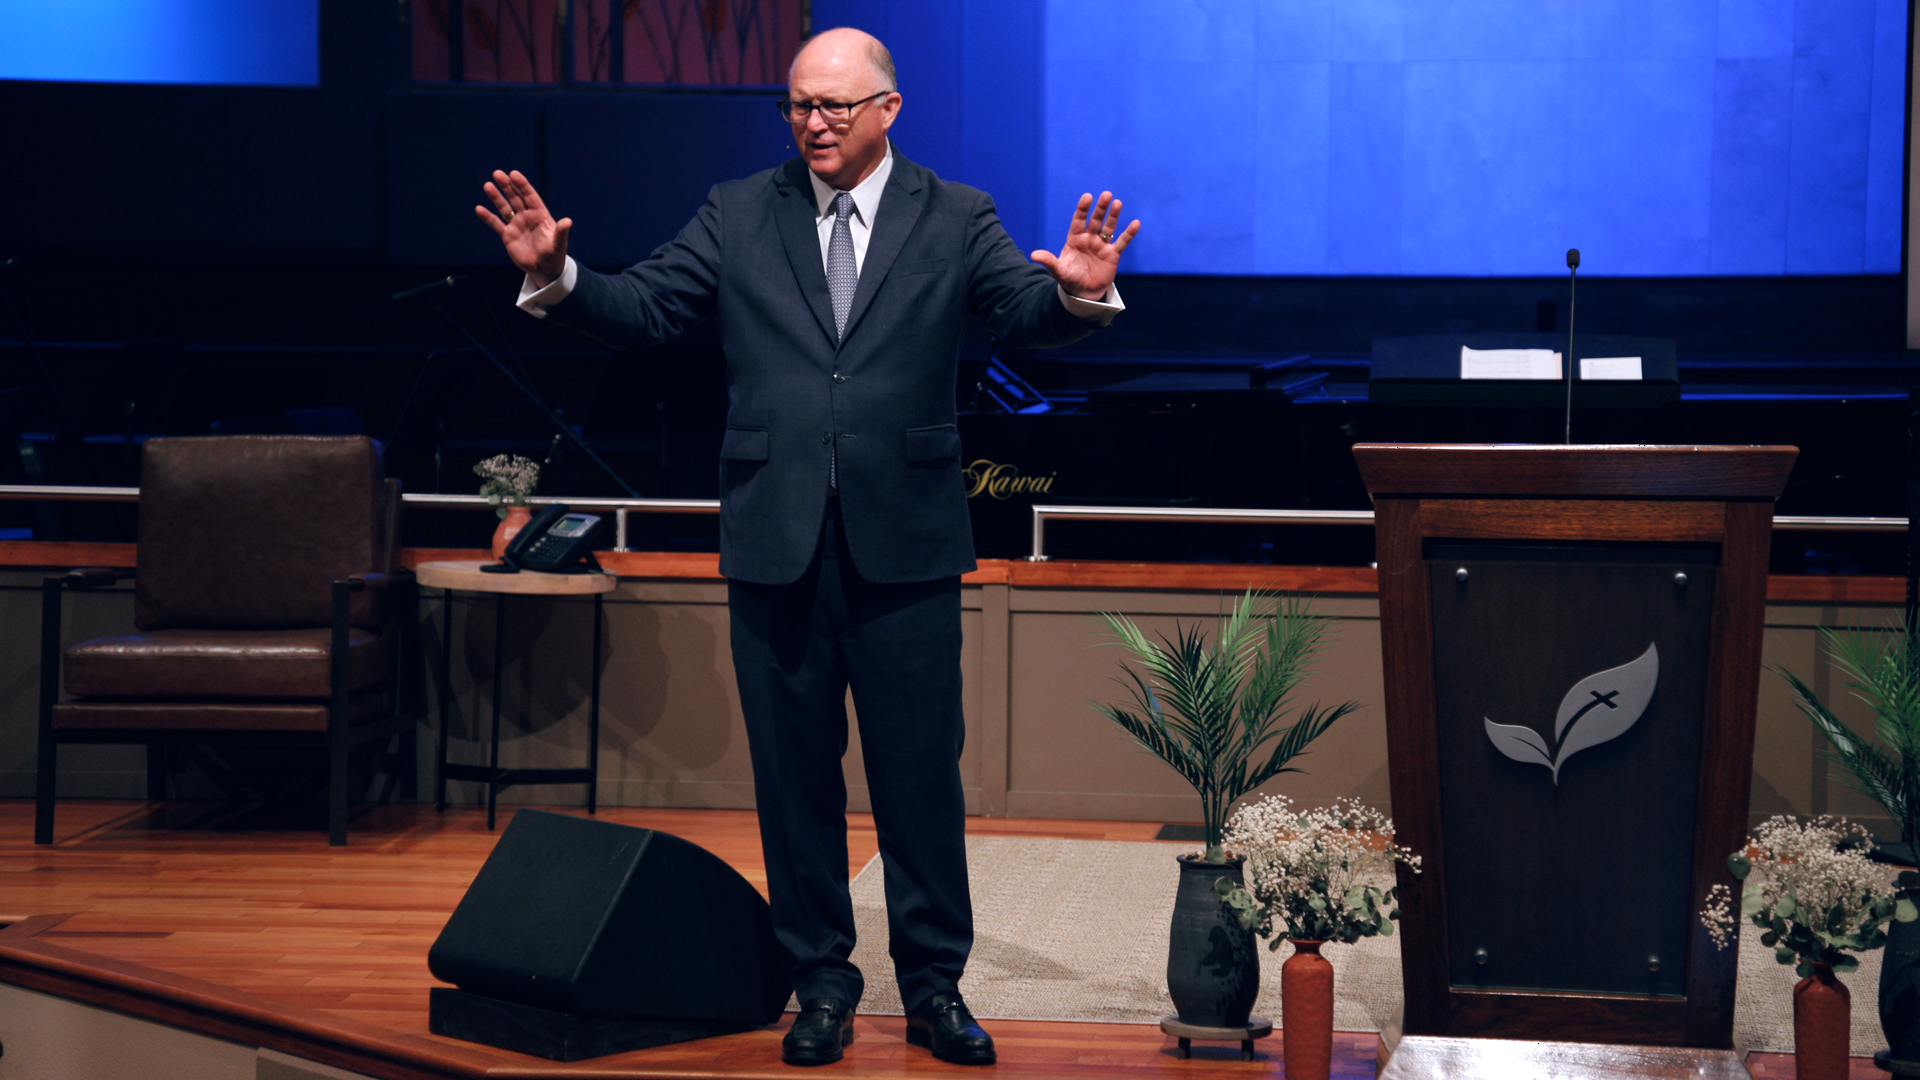 Pastor Paul Chappell: Trusting Through the Trials